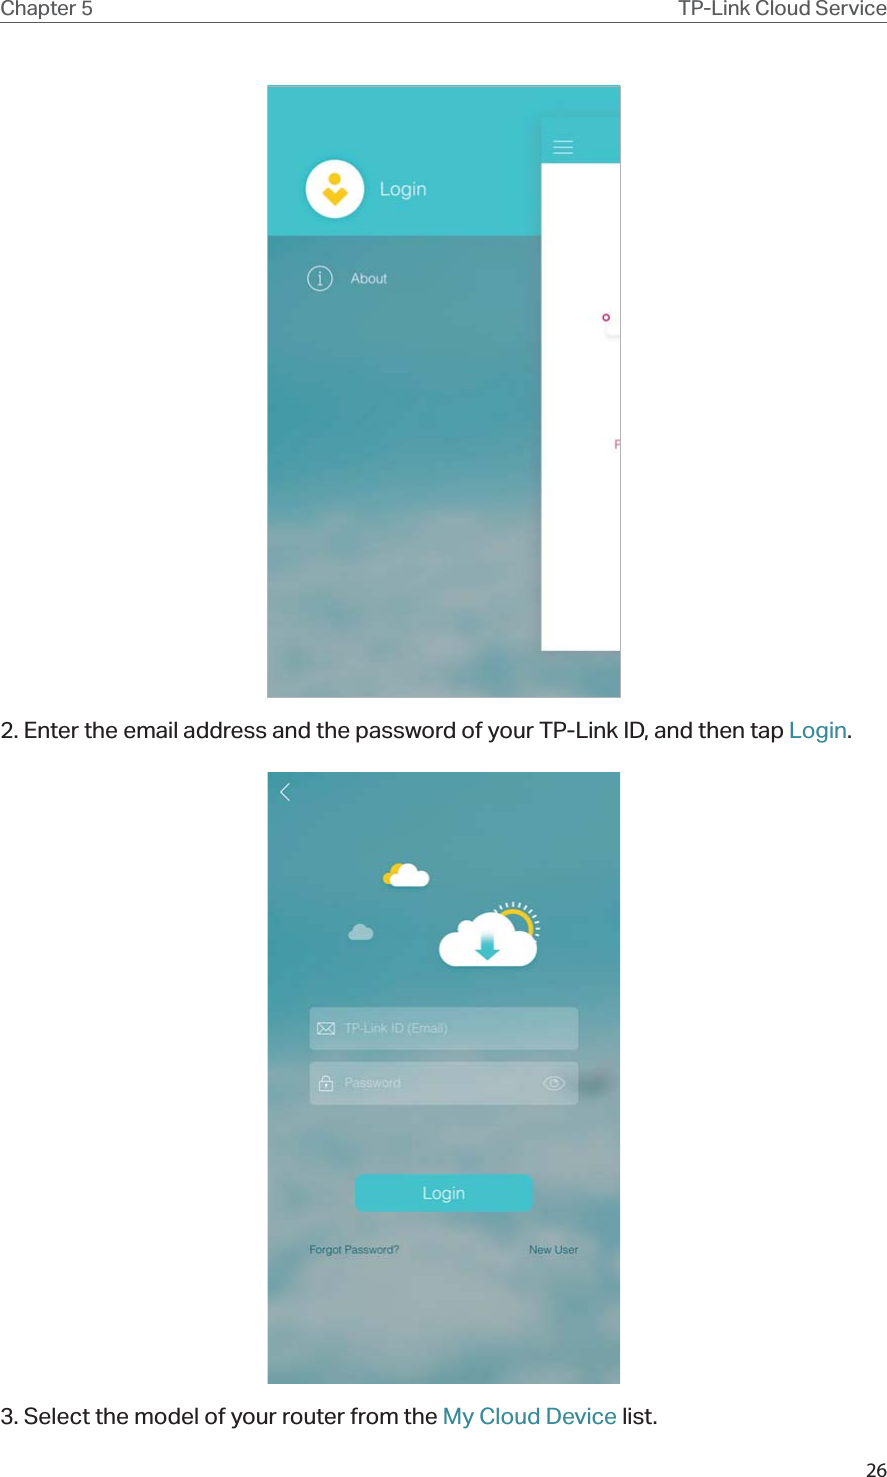 26Chapter 5 TP-Link Cloud Service2. Enter the email address and the password of your TP-Link ID, and then tap Login.3. Select the model of your router from the My Cloud Device list.